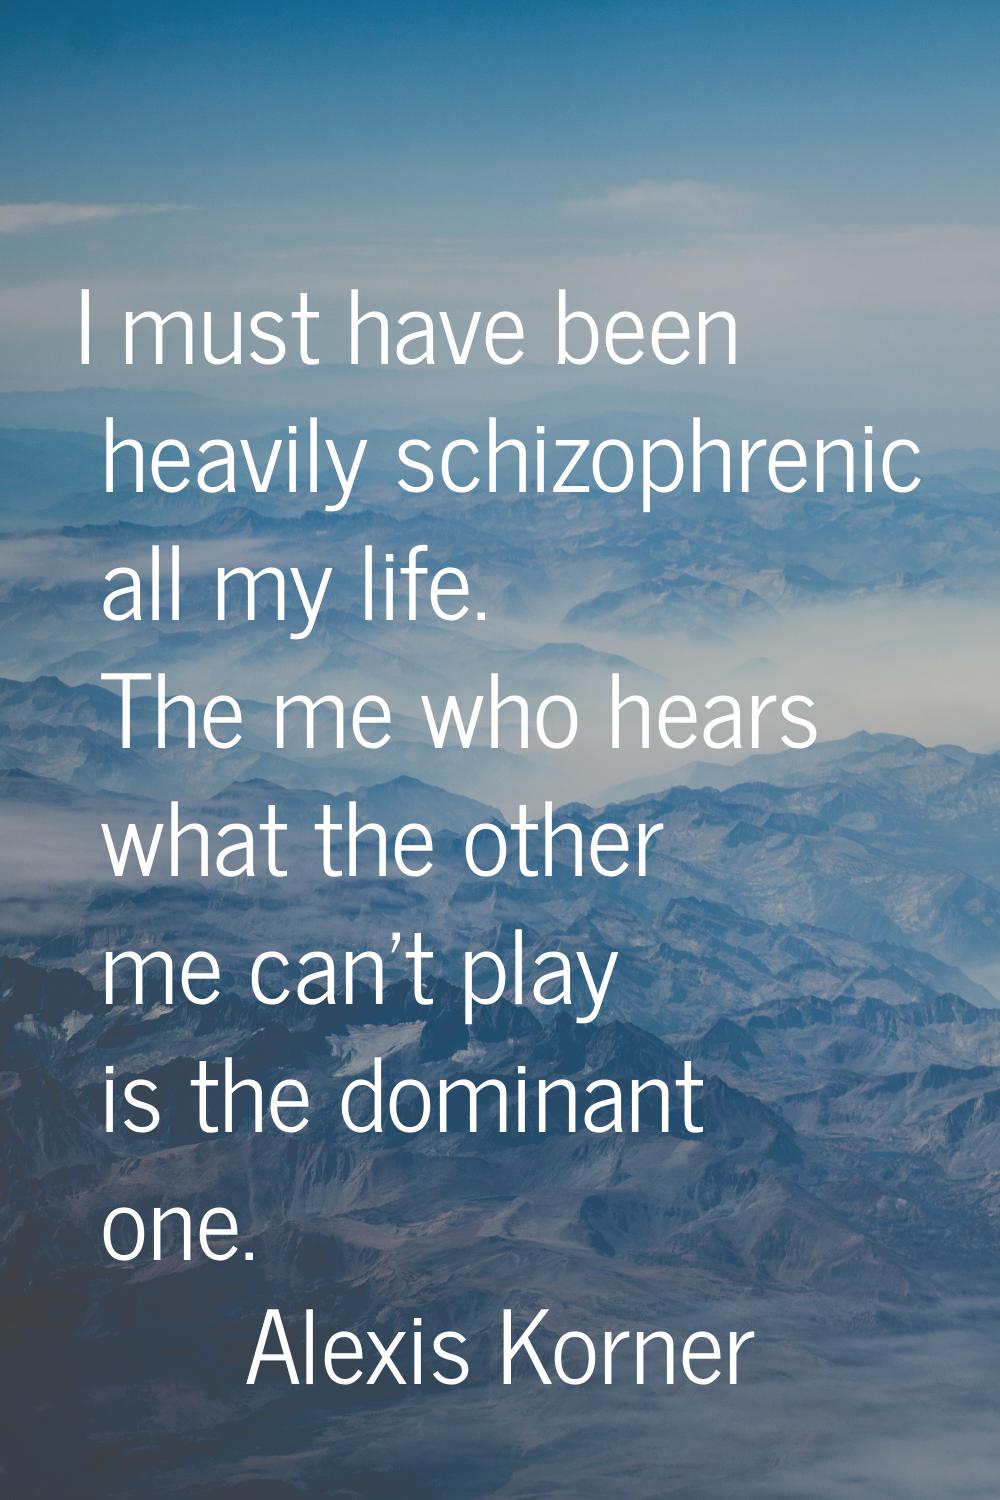 I must have been heavily schizophrenic all my life. The me who hears what the other me can't play i